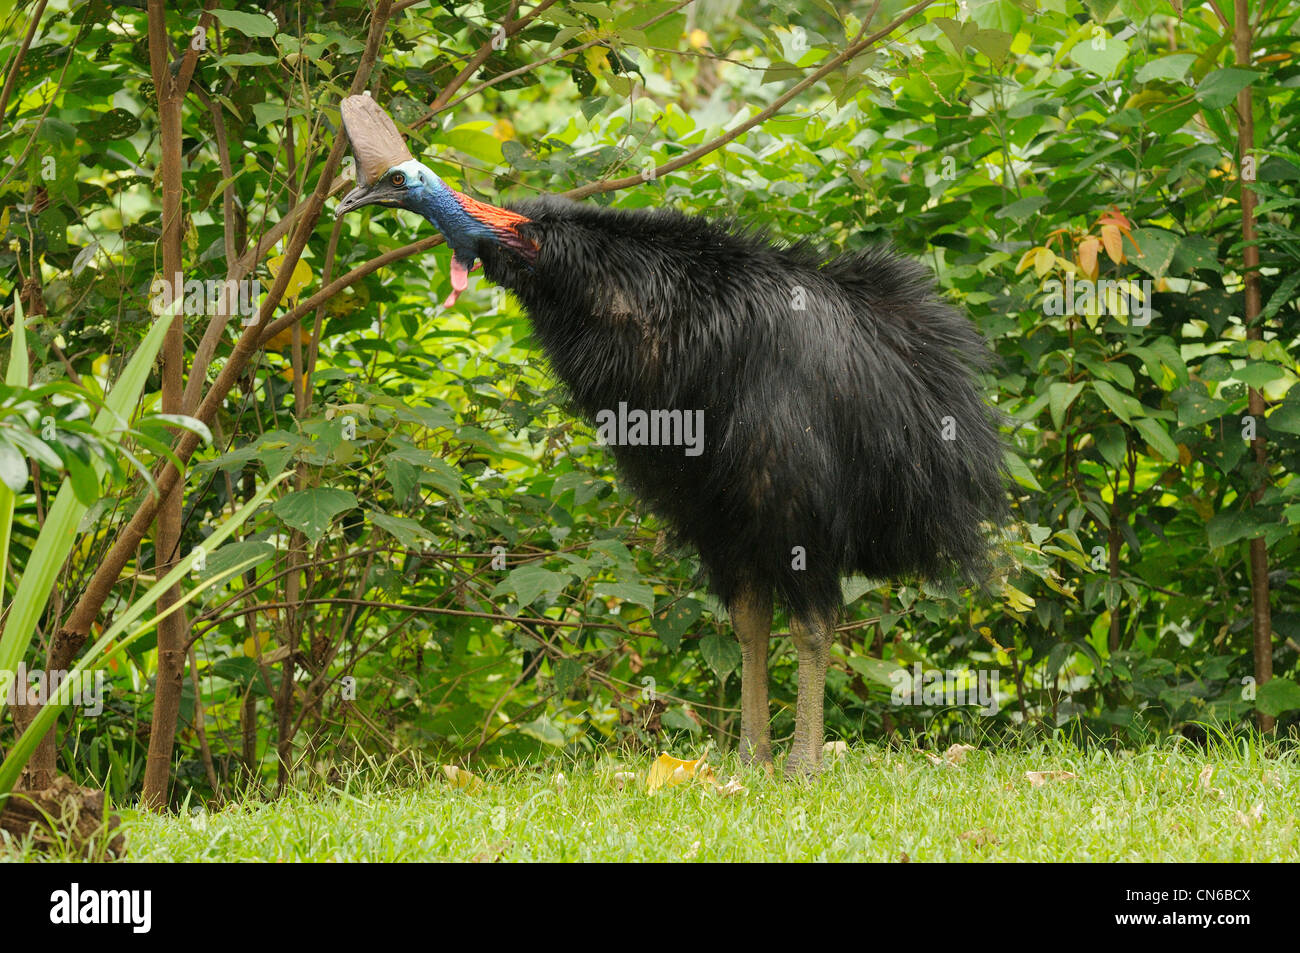 Southern Cassowary Casuarius casuarius Adult female shaking feathers Photographed  in Wet Tropics, north Queensland, Australia Stock Photo